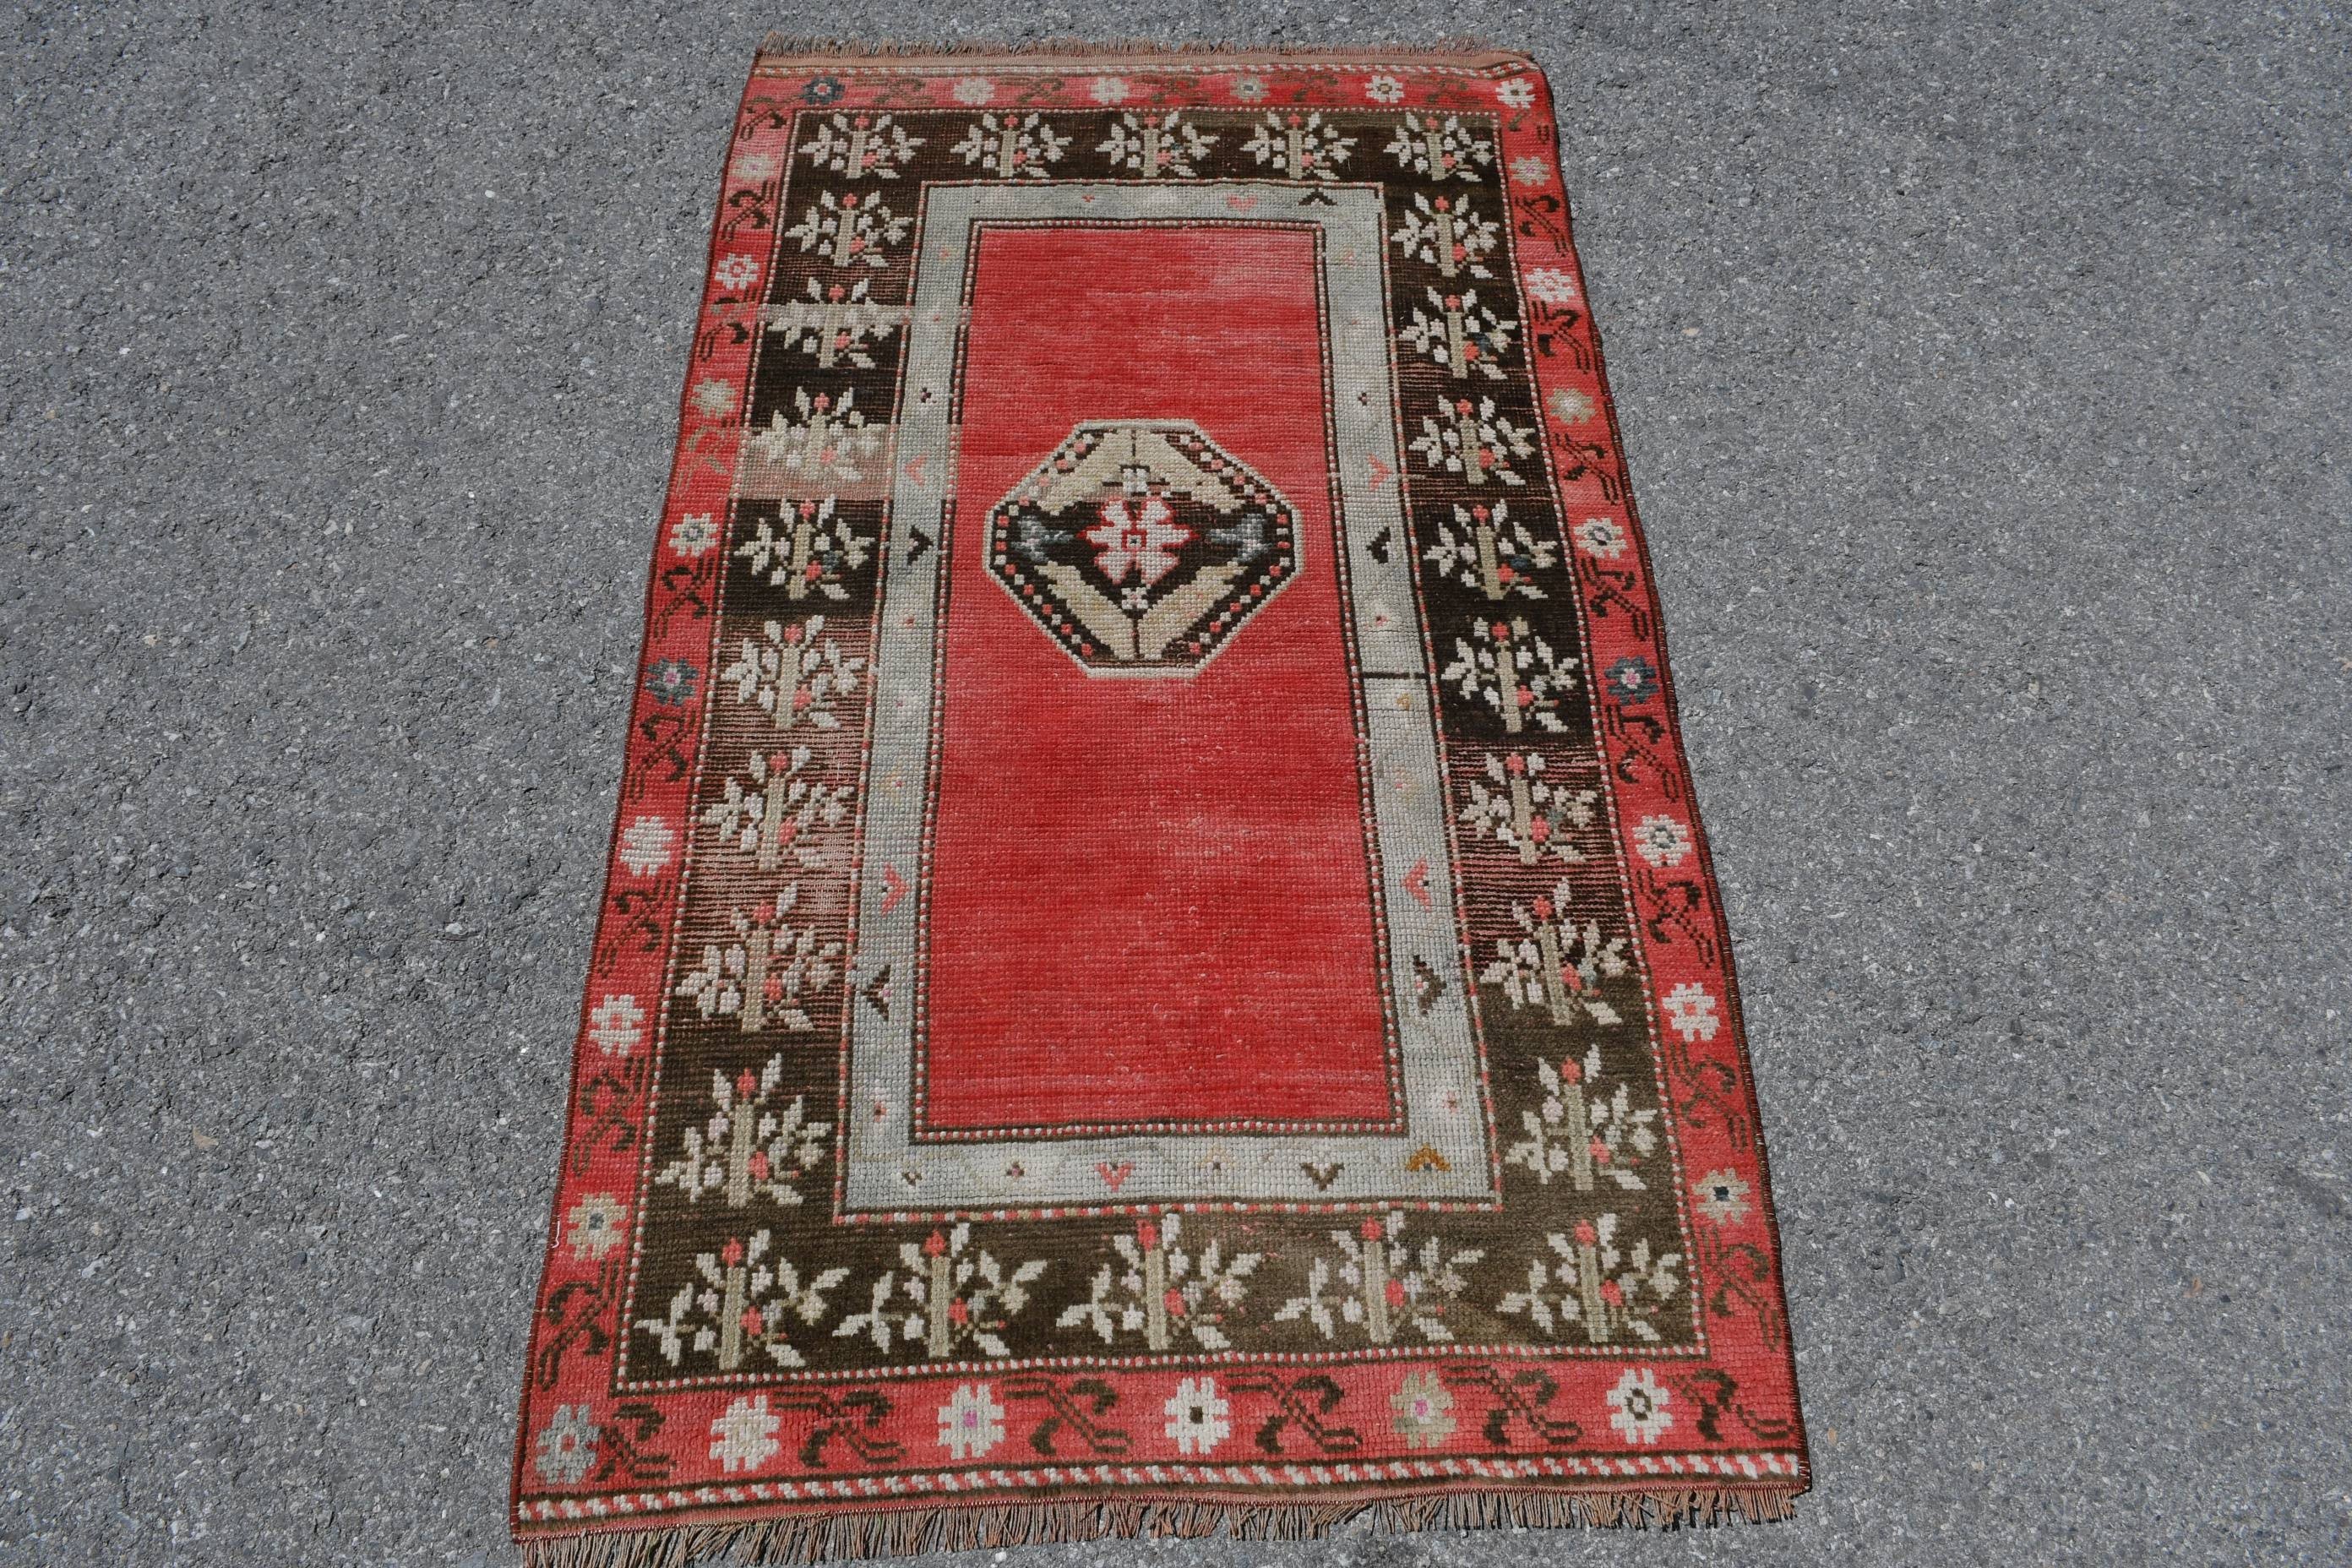 Vintage Rugs, Rugs for Car Mat, Nursery Rugs, 2.8x4.8 ft Small Rugs, Home Decor Rug, Turkish Rug, Cool Rugs, Red Wool Rug, Car Mat Rug